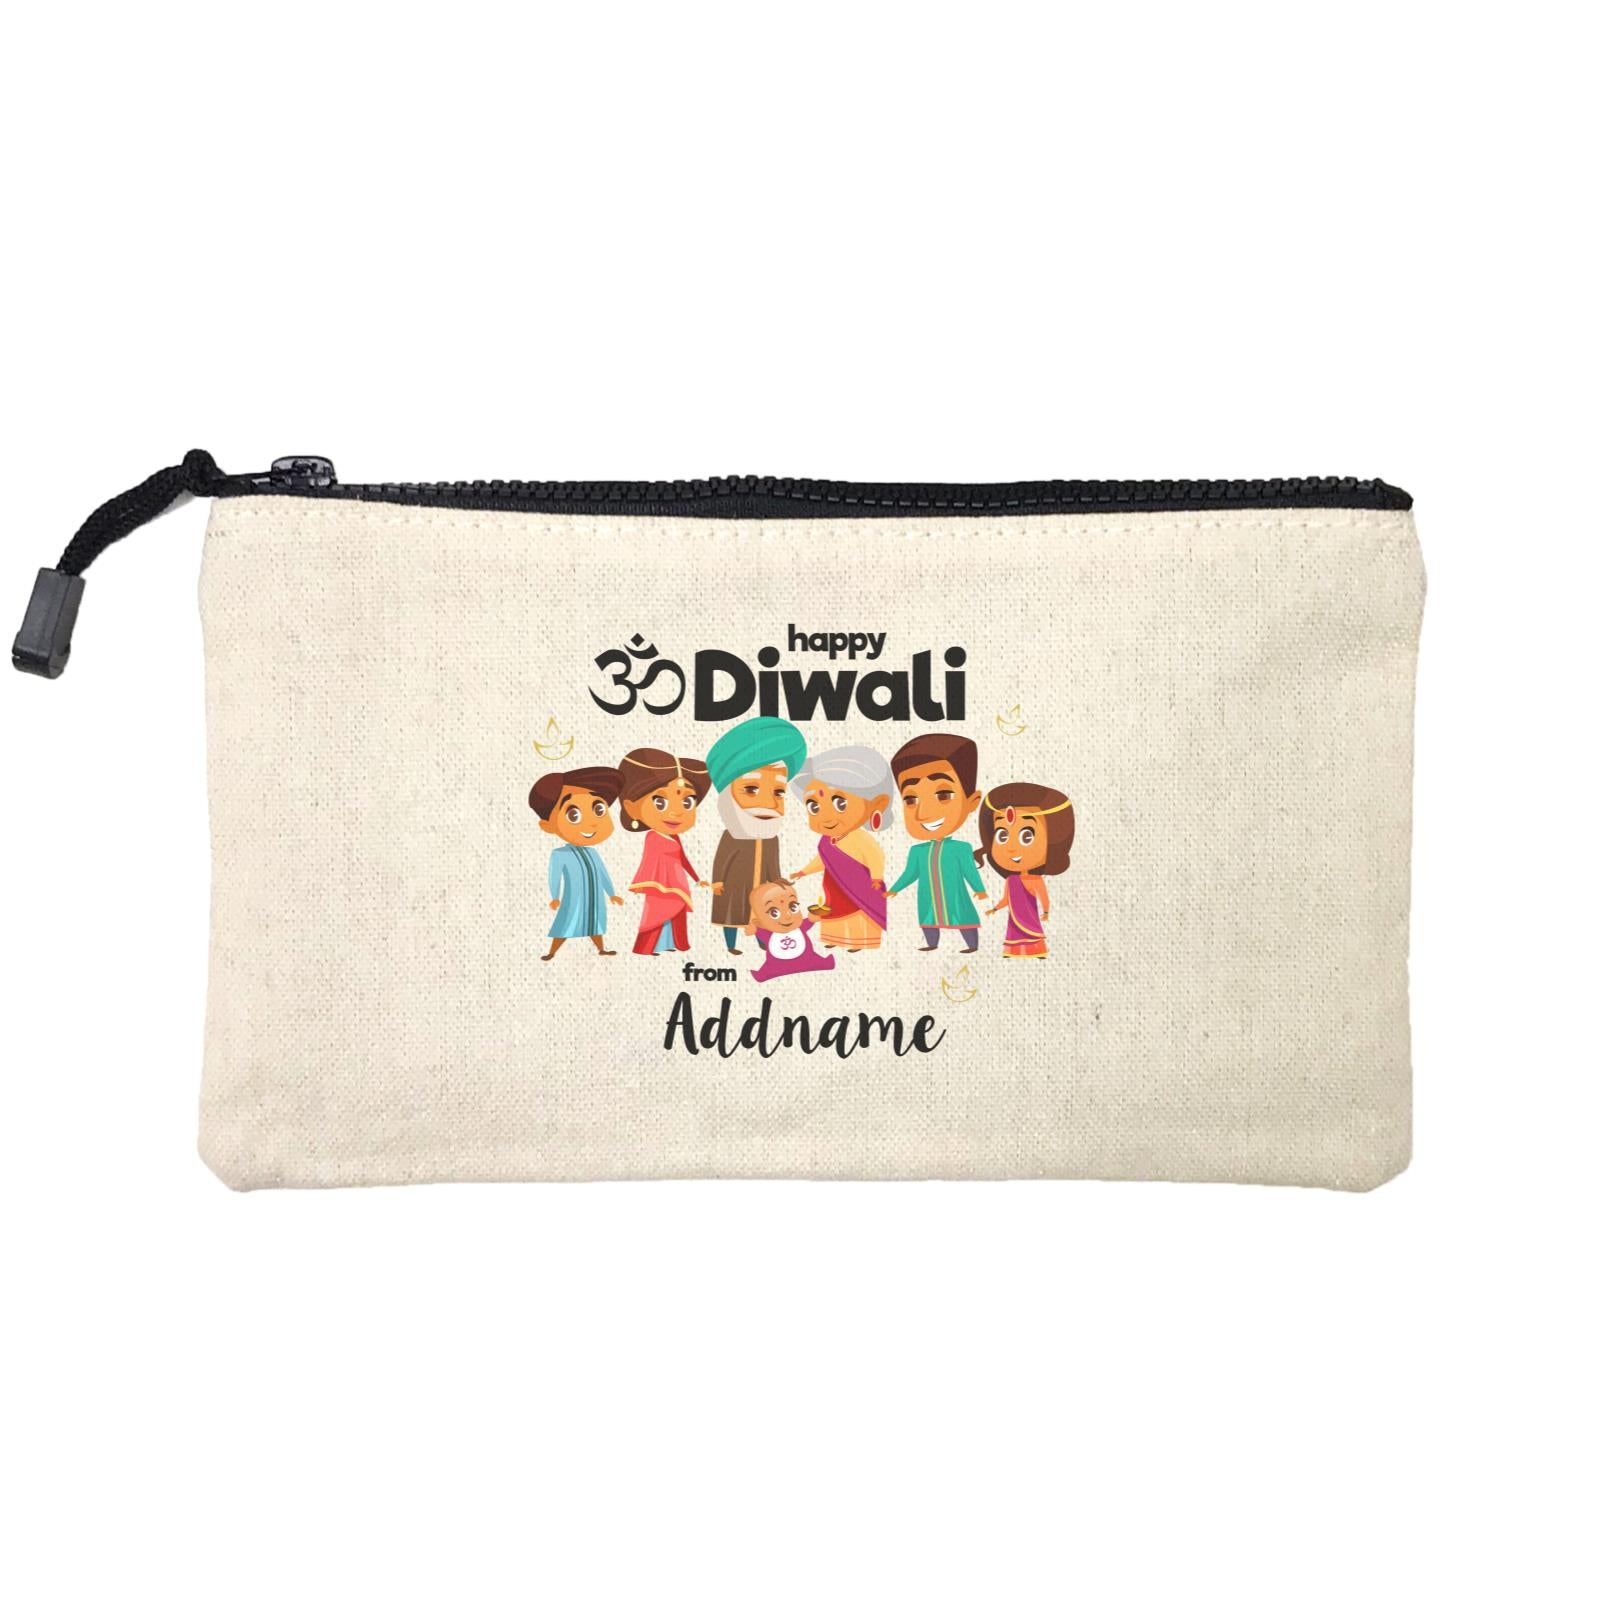 Cute Family Extended OM Happy Diwali From Addname Mini Accessories Stationery Pouch